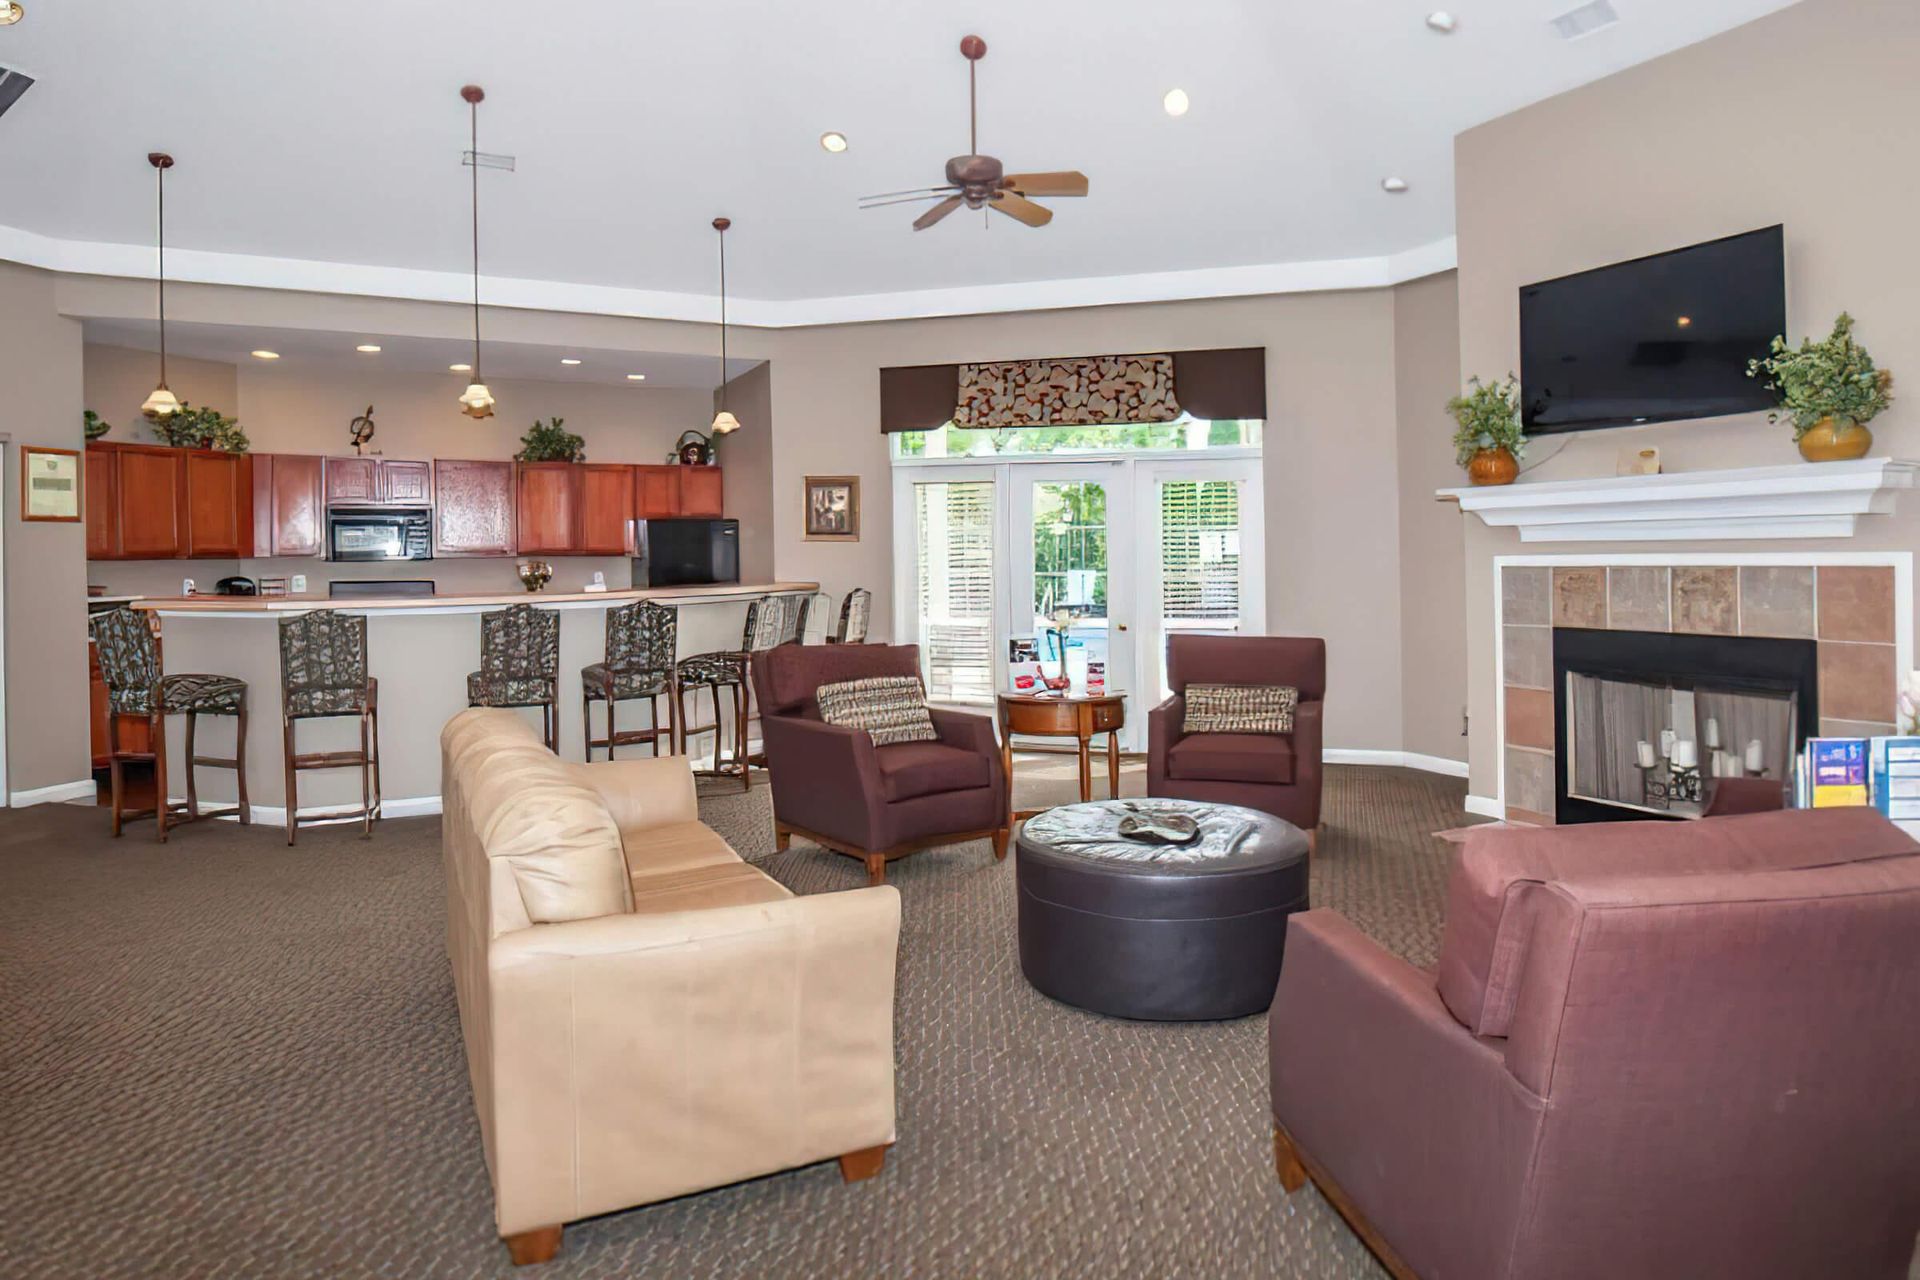 Open floor plan at Echo Ridge with living room and kitchen.